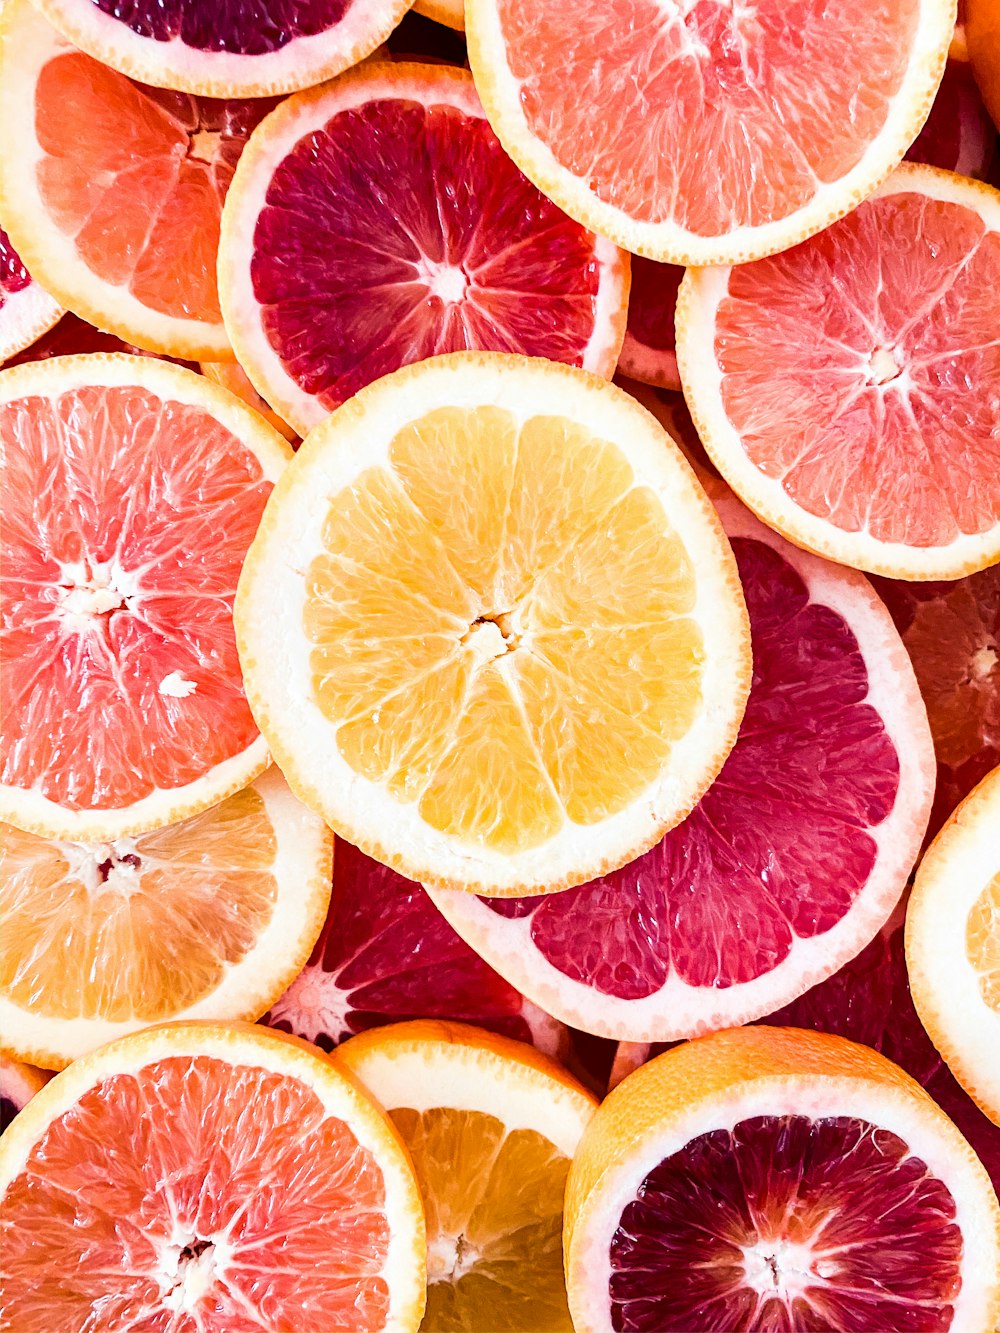 100+ Fruits Pictures | Download Free Images on Unsplash